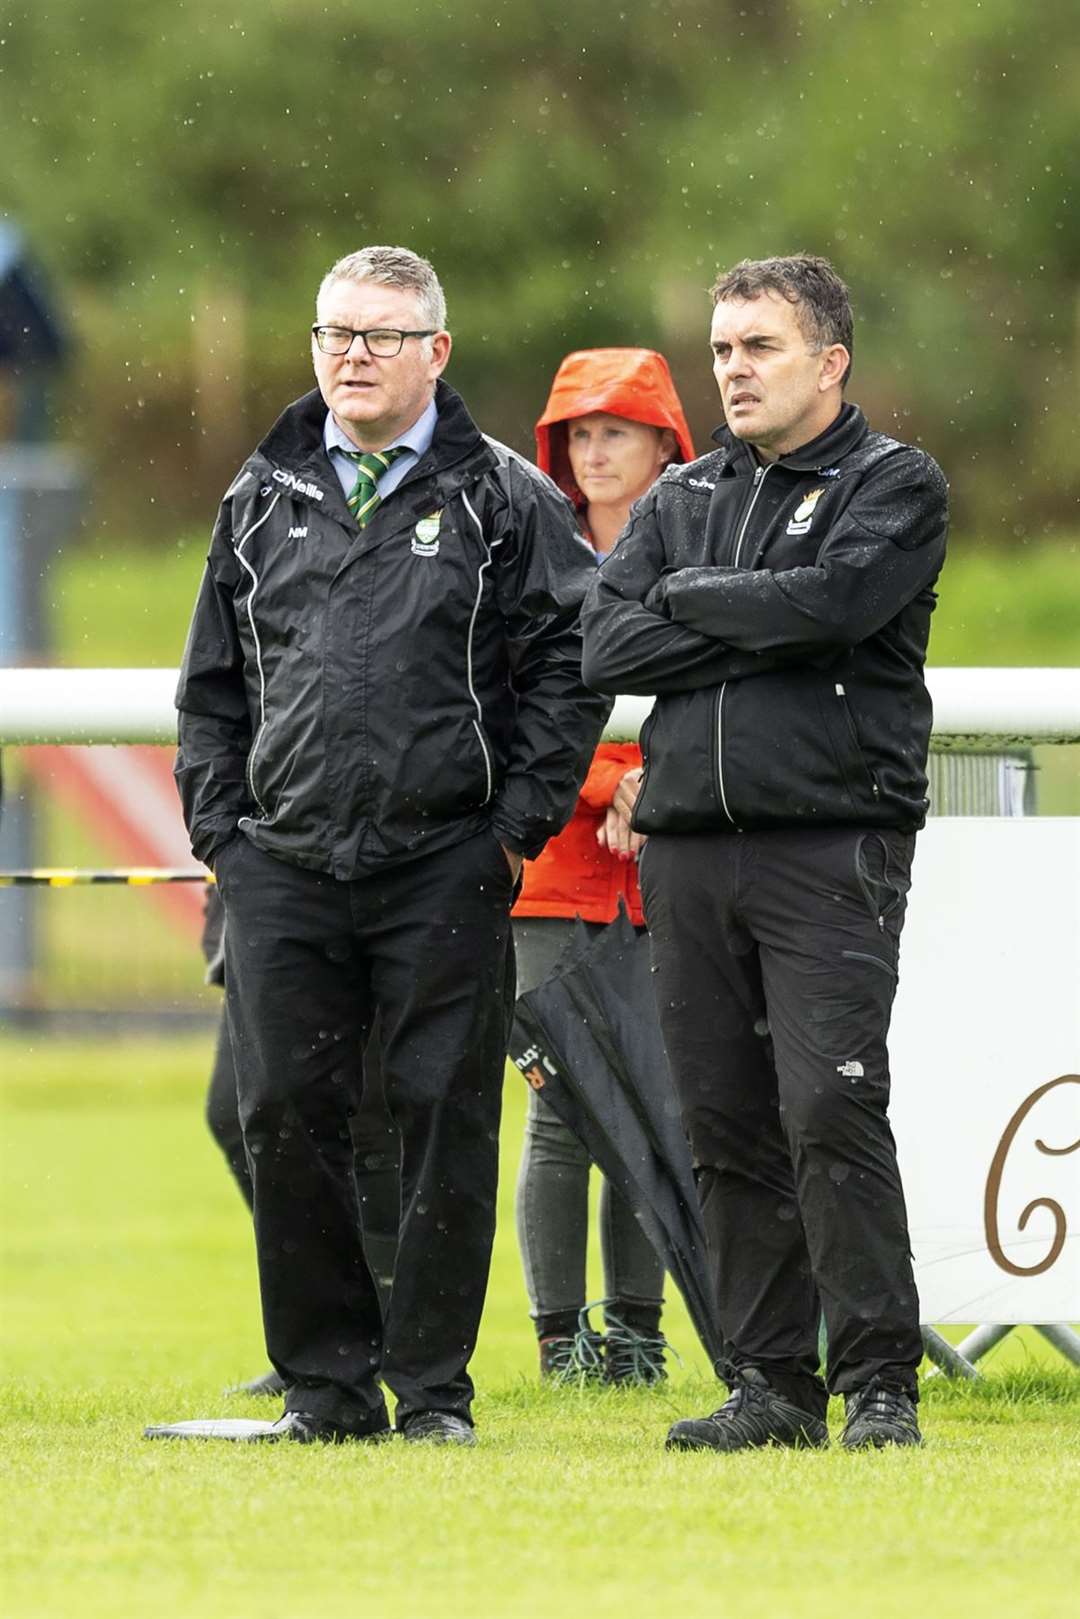 Beauly managers Niall MacLennan (left) and Gregor MacCormick. Beauly v Kyles Athletic in the Tulloch Homes Camanachd Cup quarter final, played at Braeview Park, Beauly.